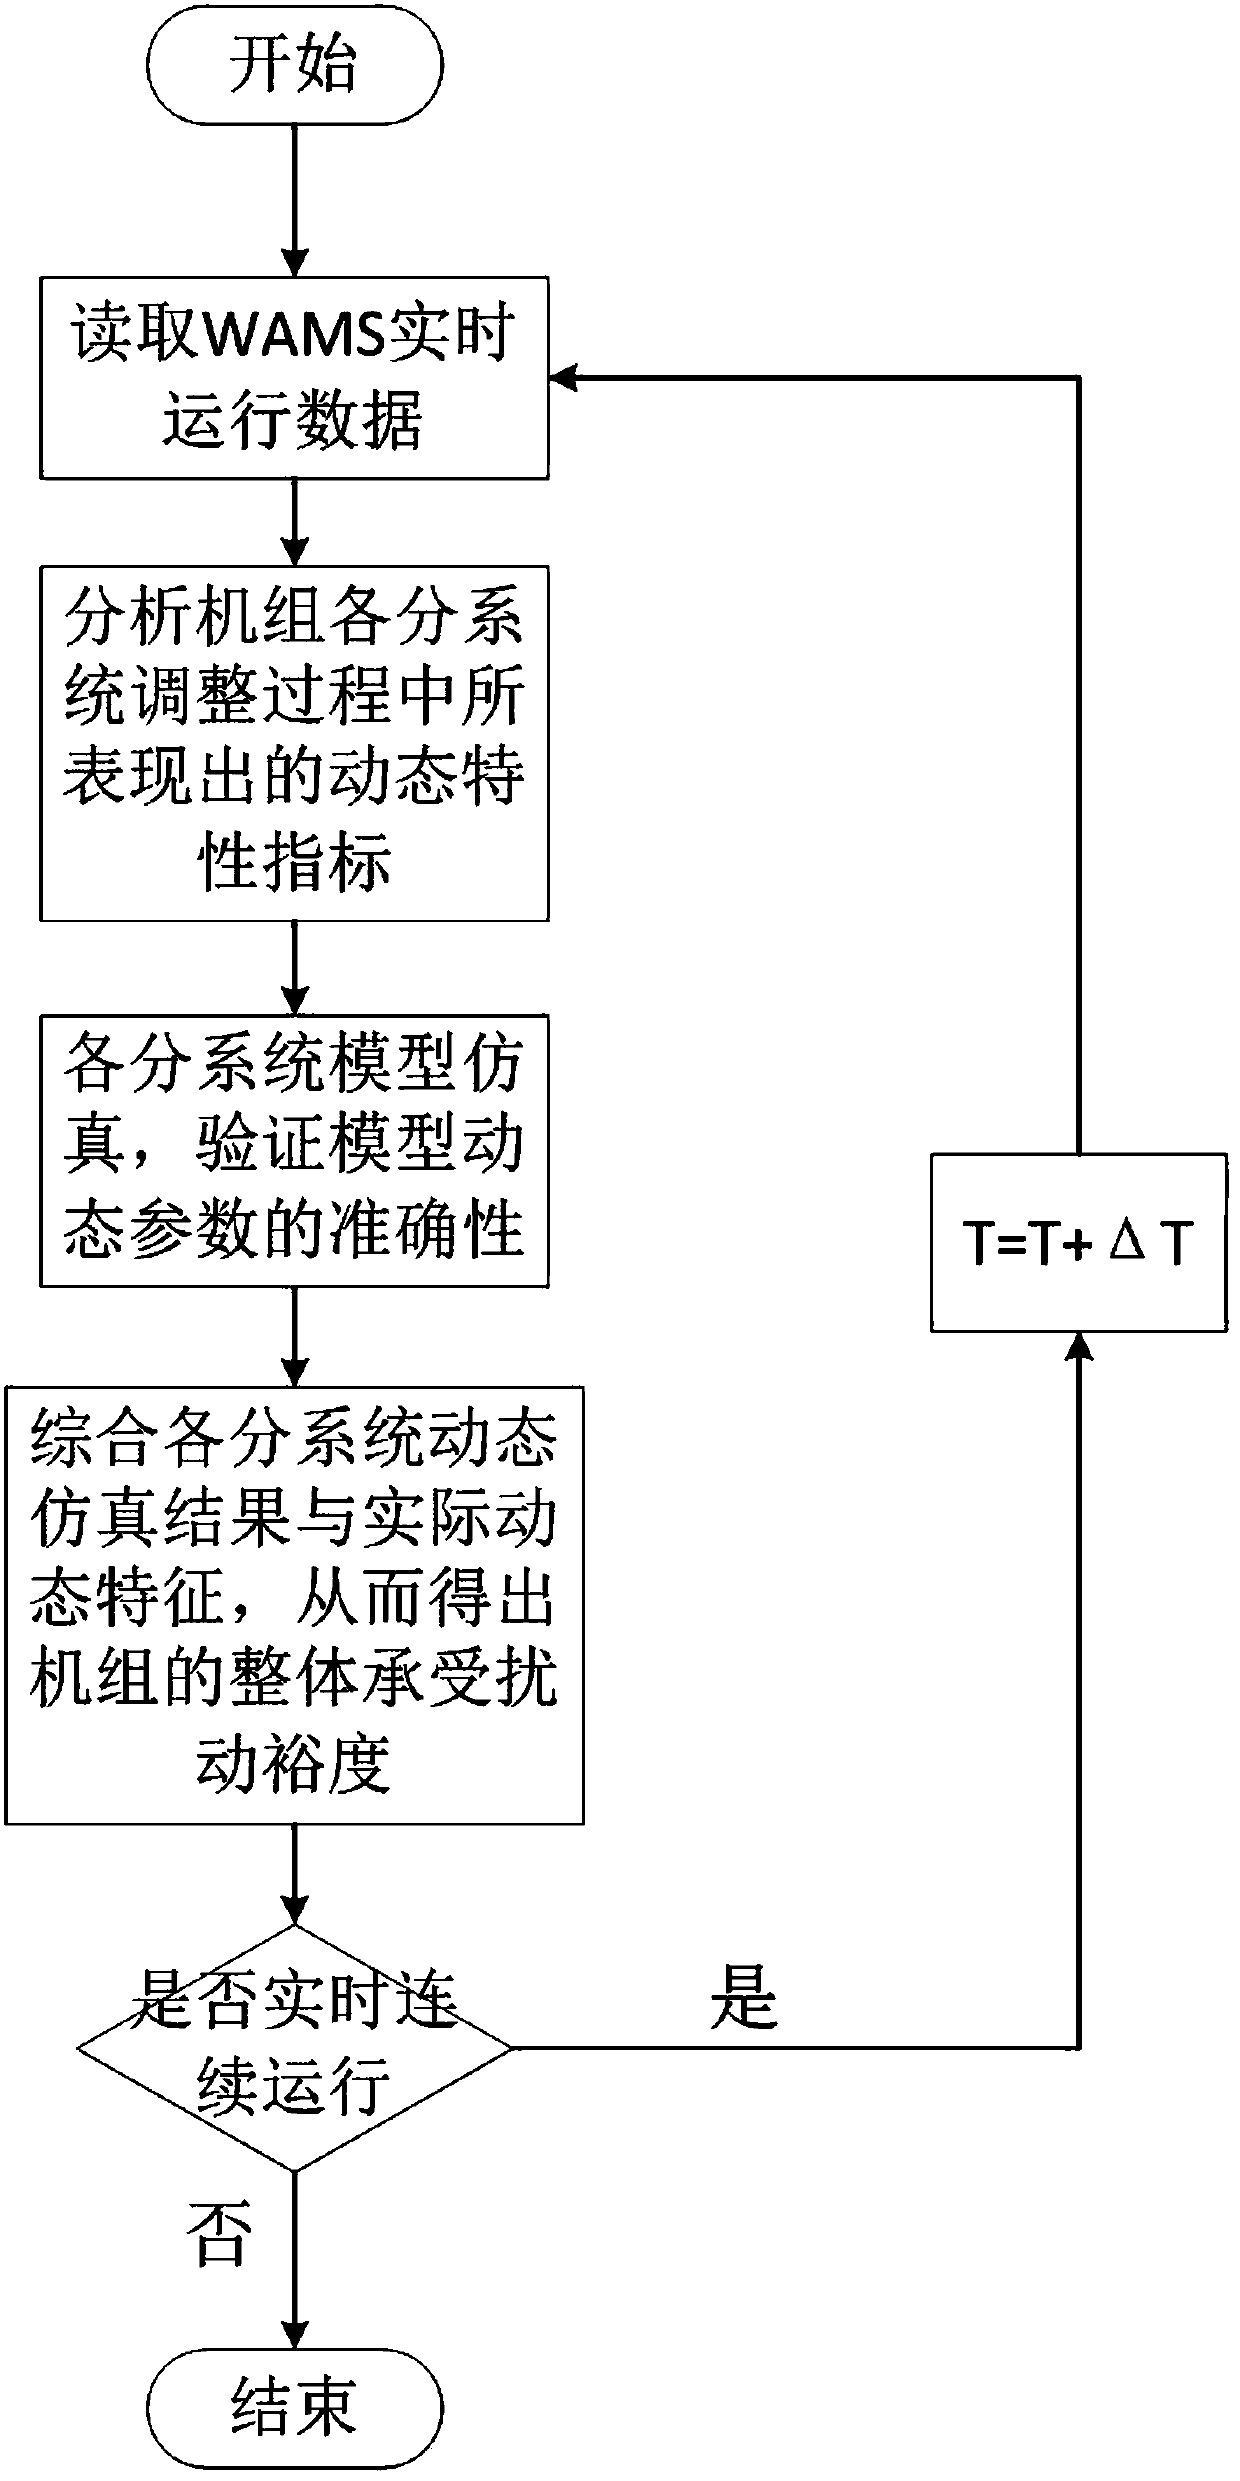 Operation safety adaptive evaluation method for thermal power generating unit in primary frequency modulation performance test